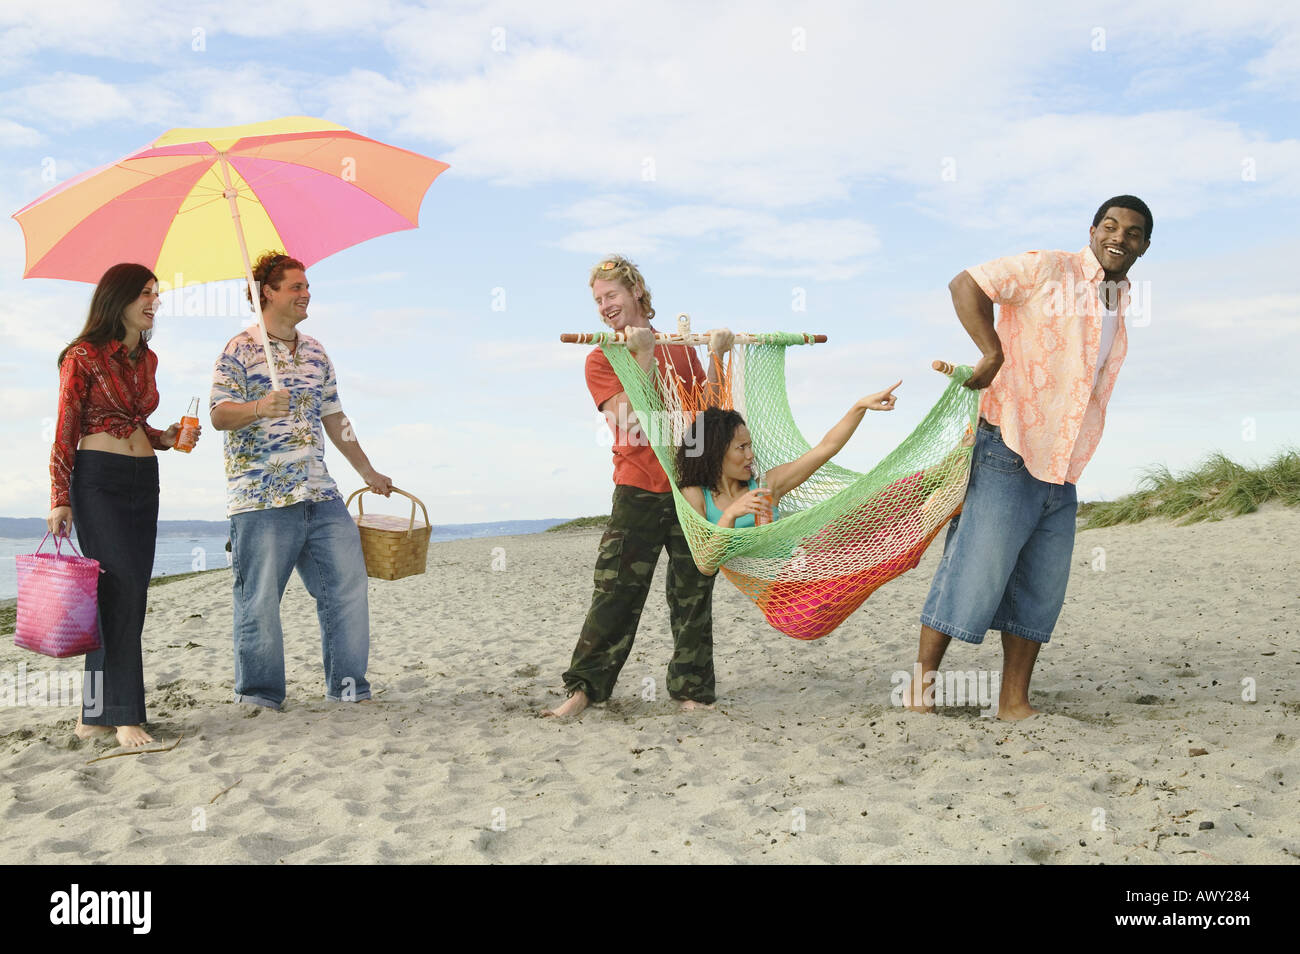 People having fun at a beach party Stock Photo